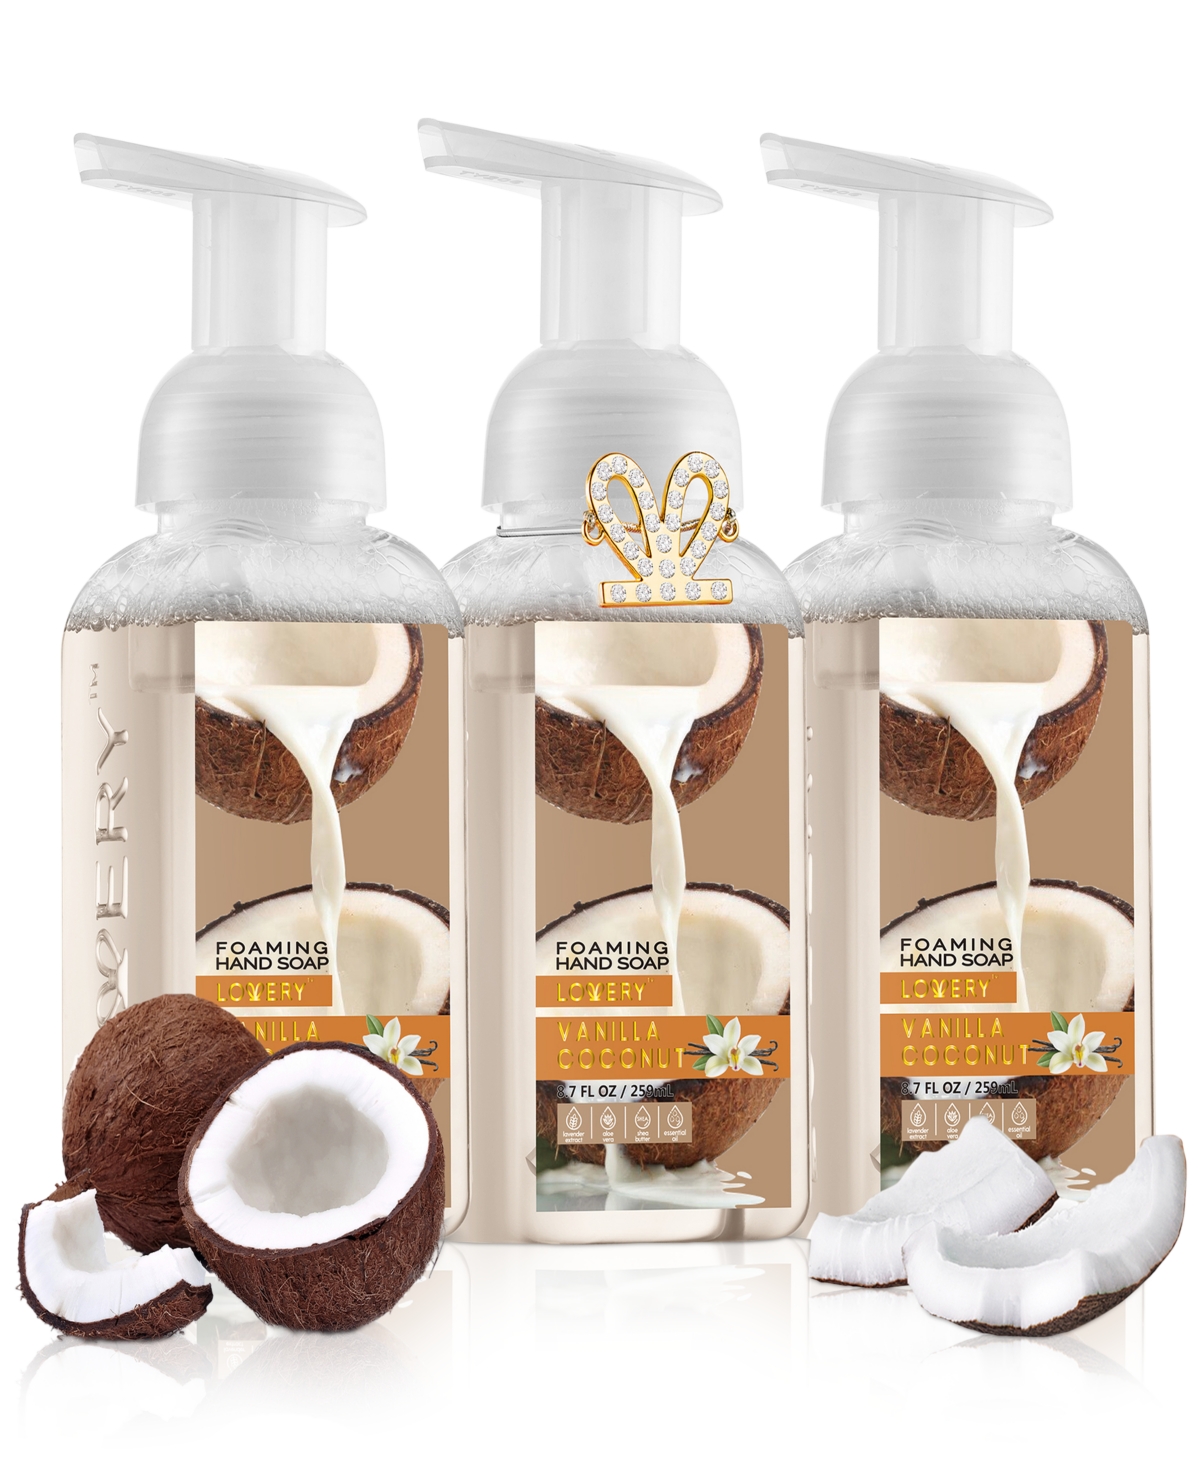 Hand Foaming Soap in Vanilla Coconut, Moisturizing Hand Soap with Flawless Crystal Heart Bracelet - Hand Wash Set, 4 Piece